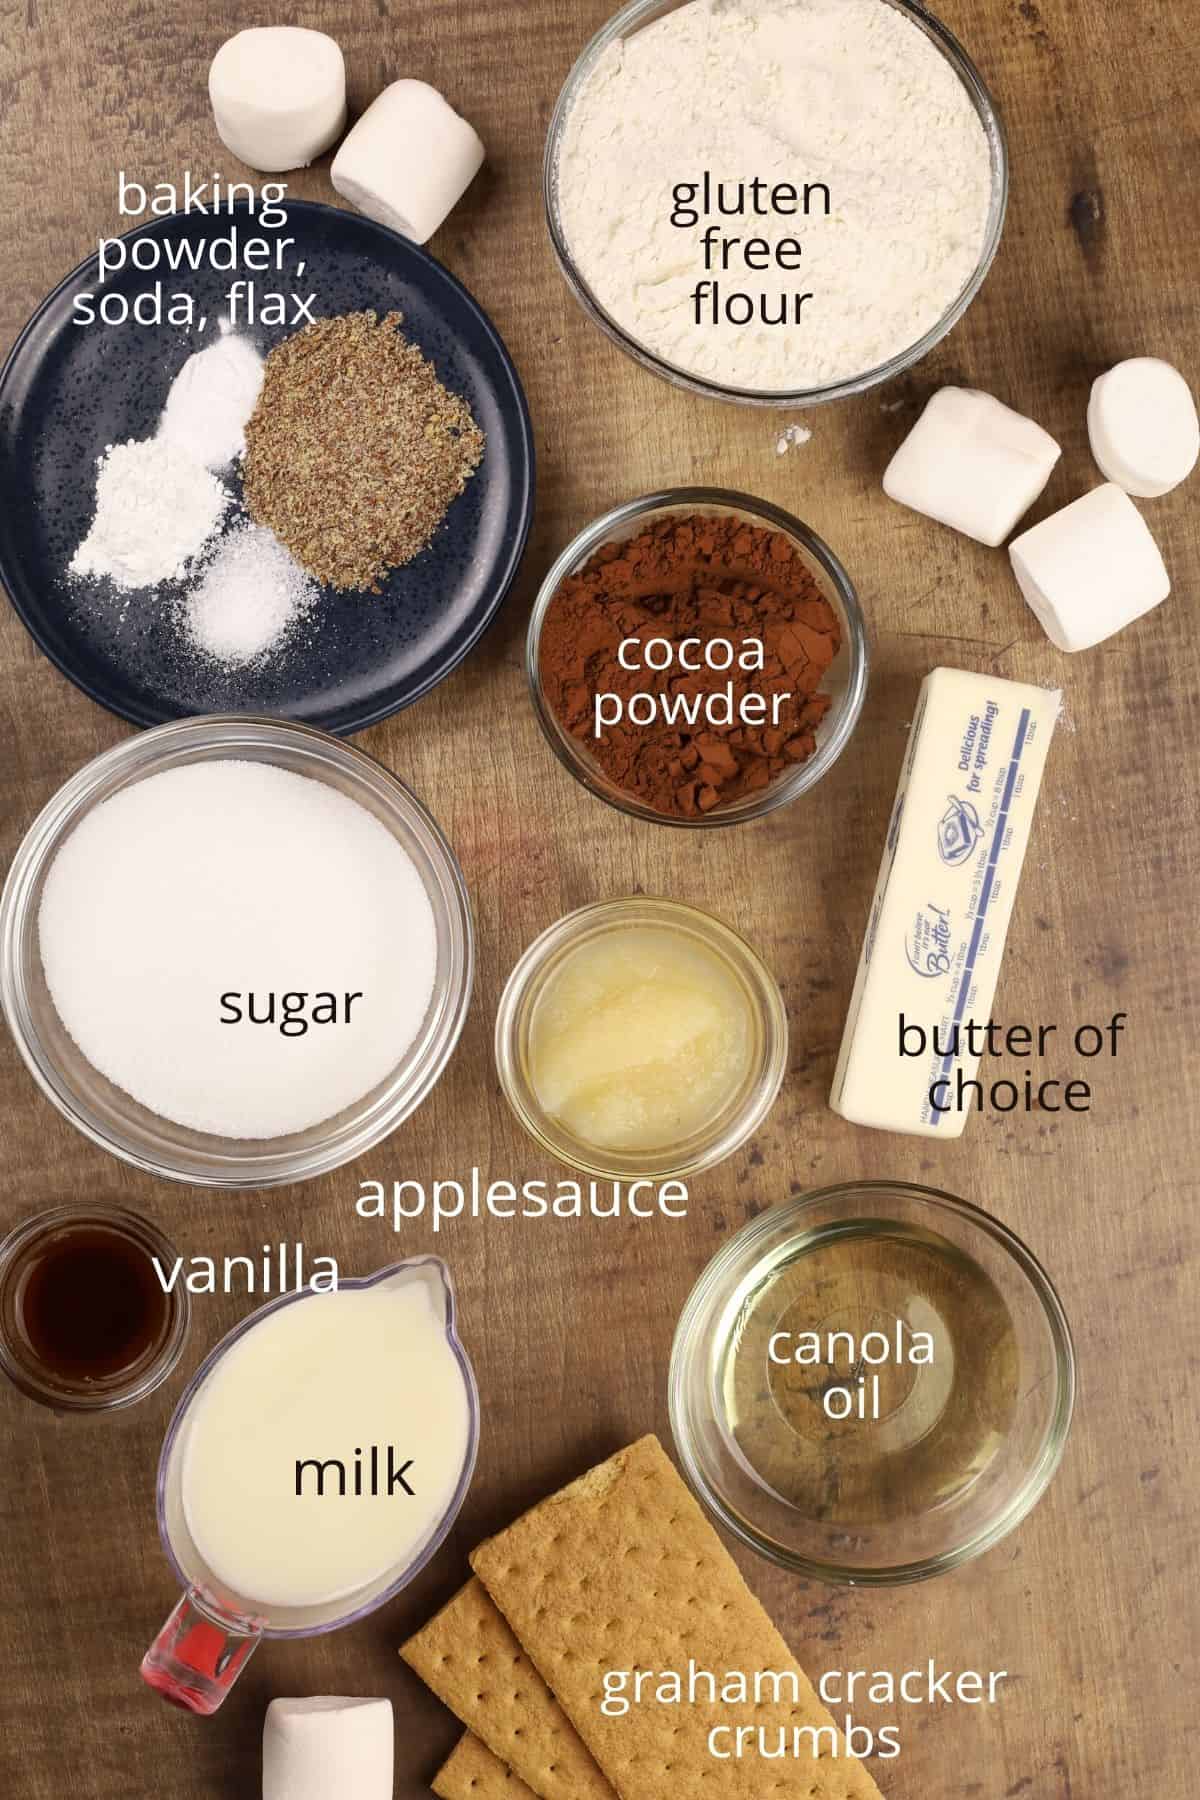 ingredients for s'mores cupcakes in various glass bowls on the kitchen table